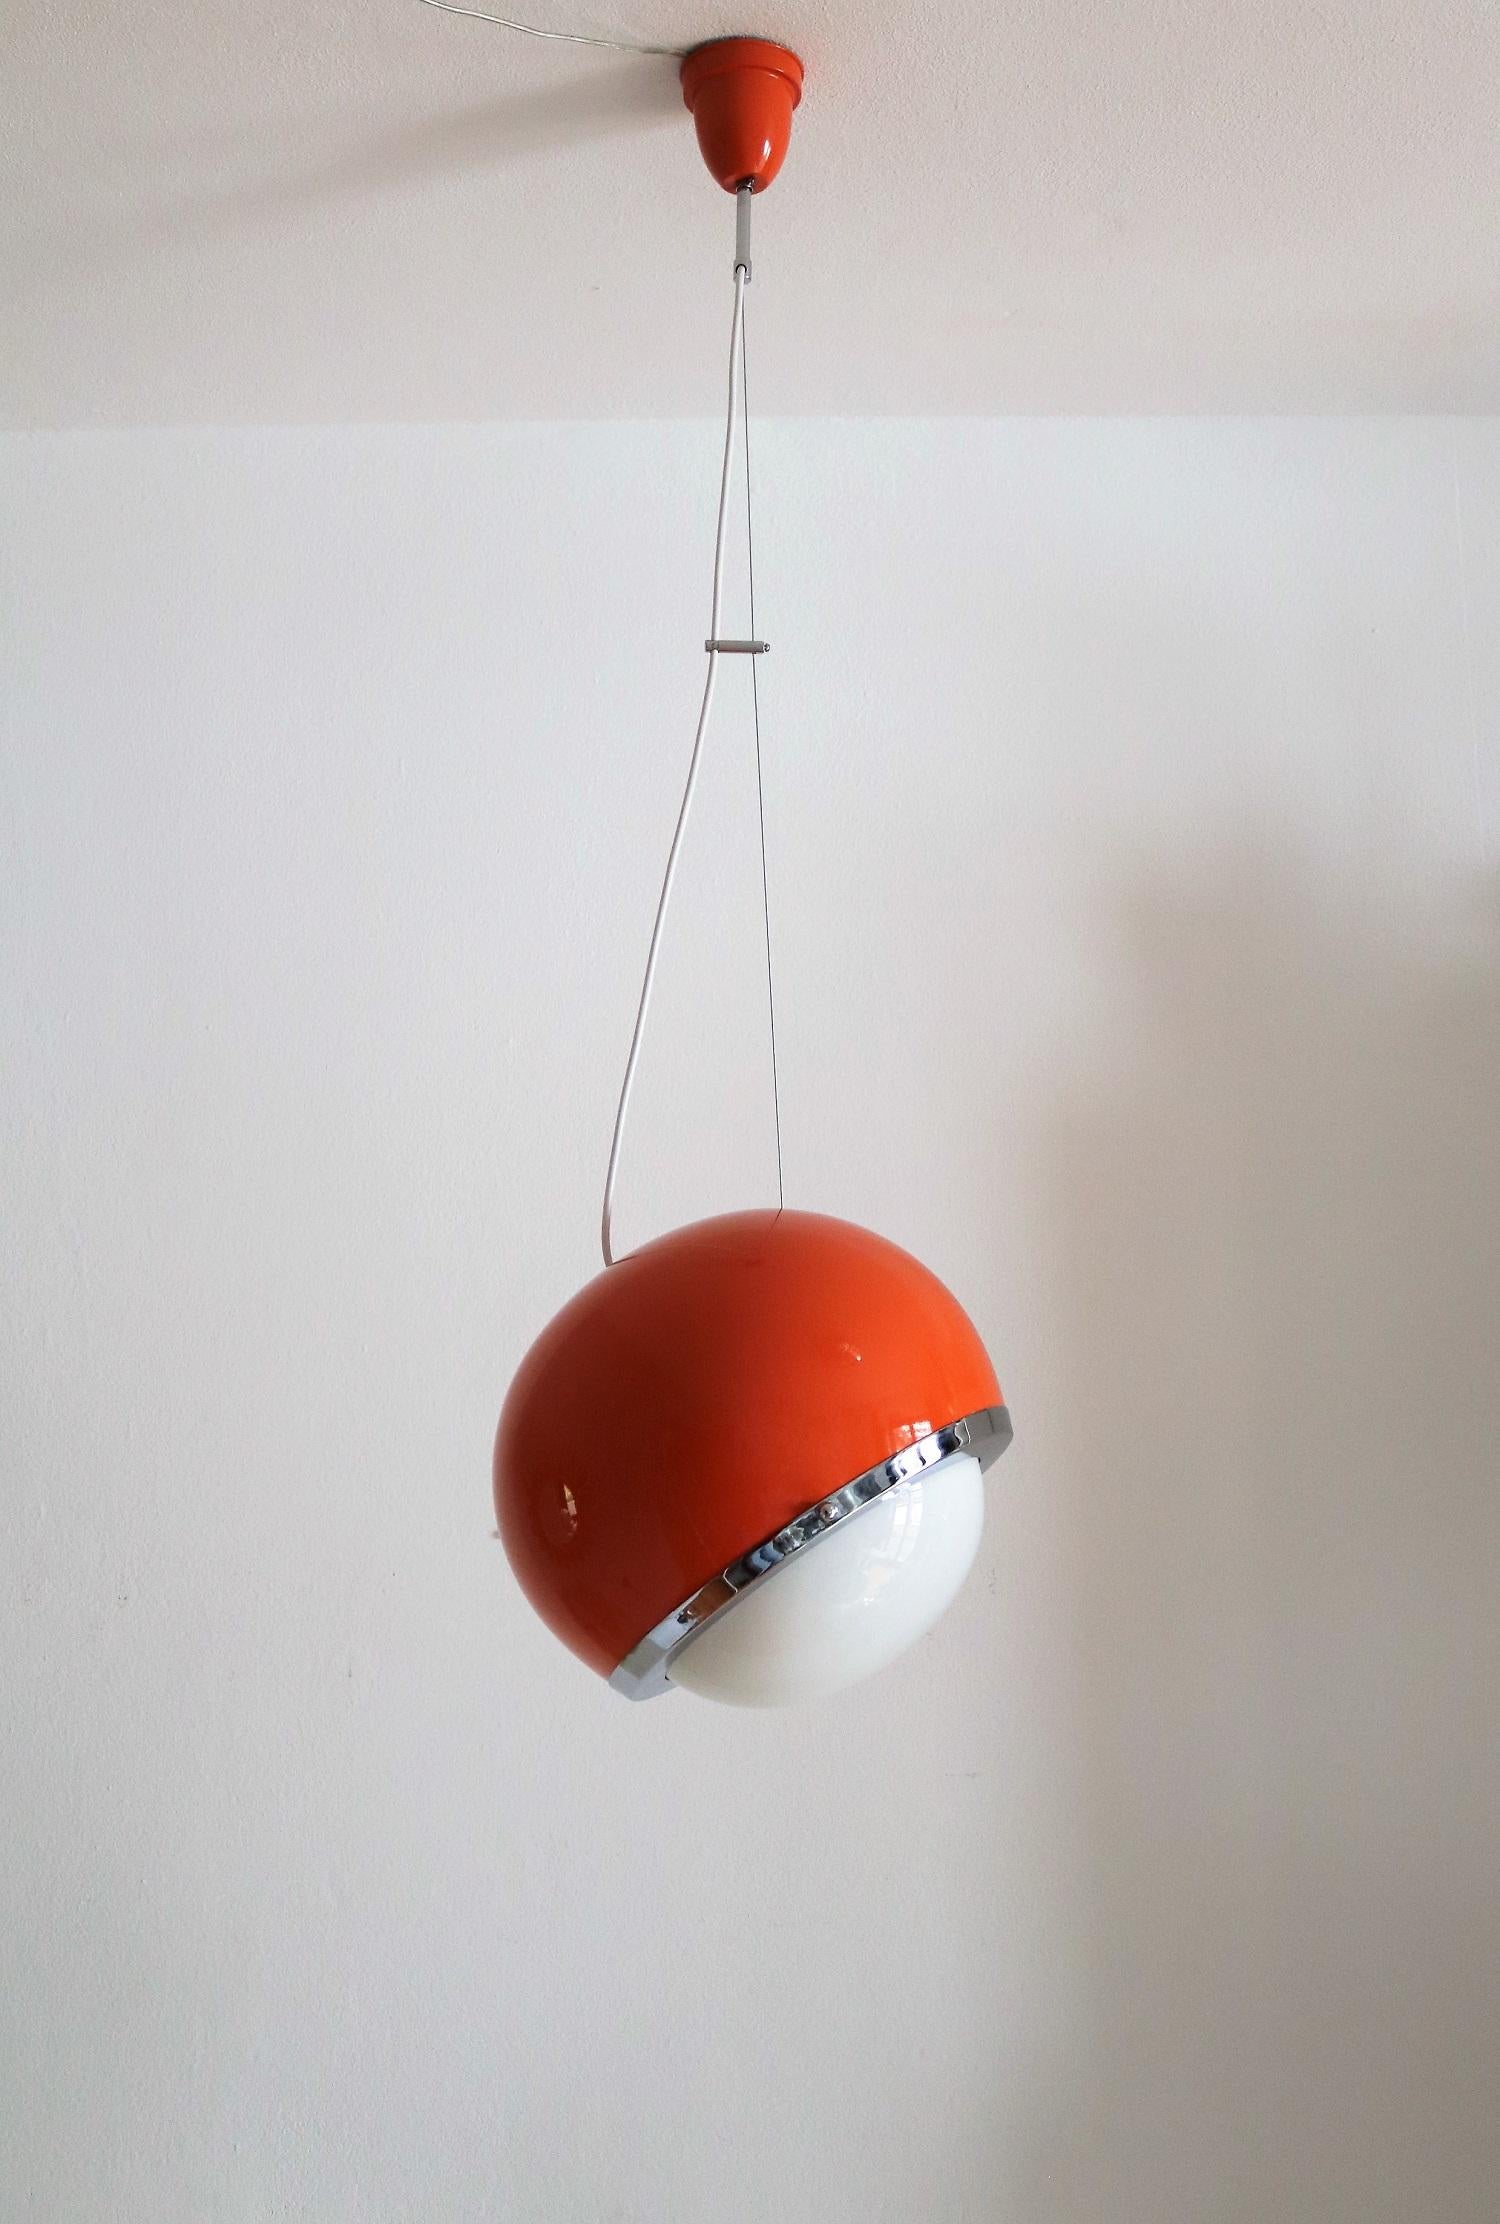 Italian Midcentury Pendant Lamp from the Space Age in Glass and Aluminium, 1960s For Sale 5